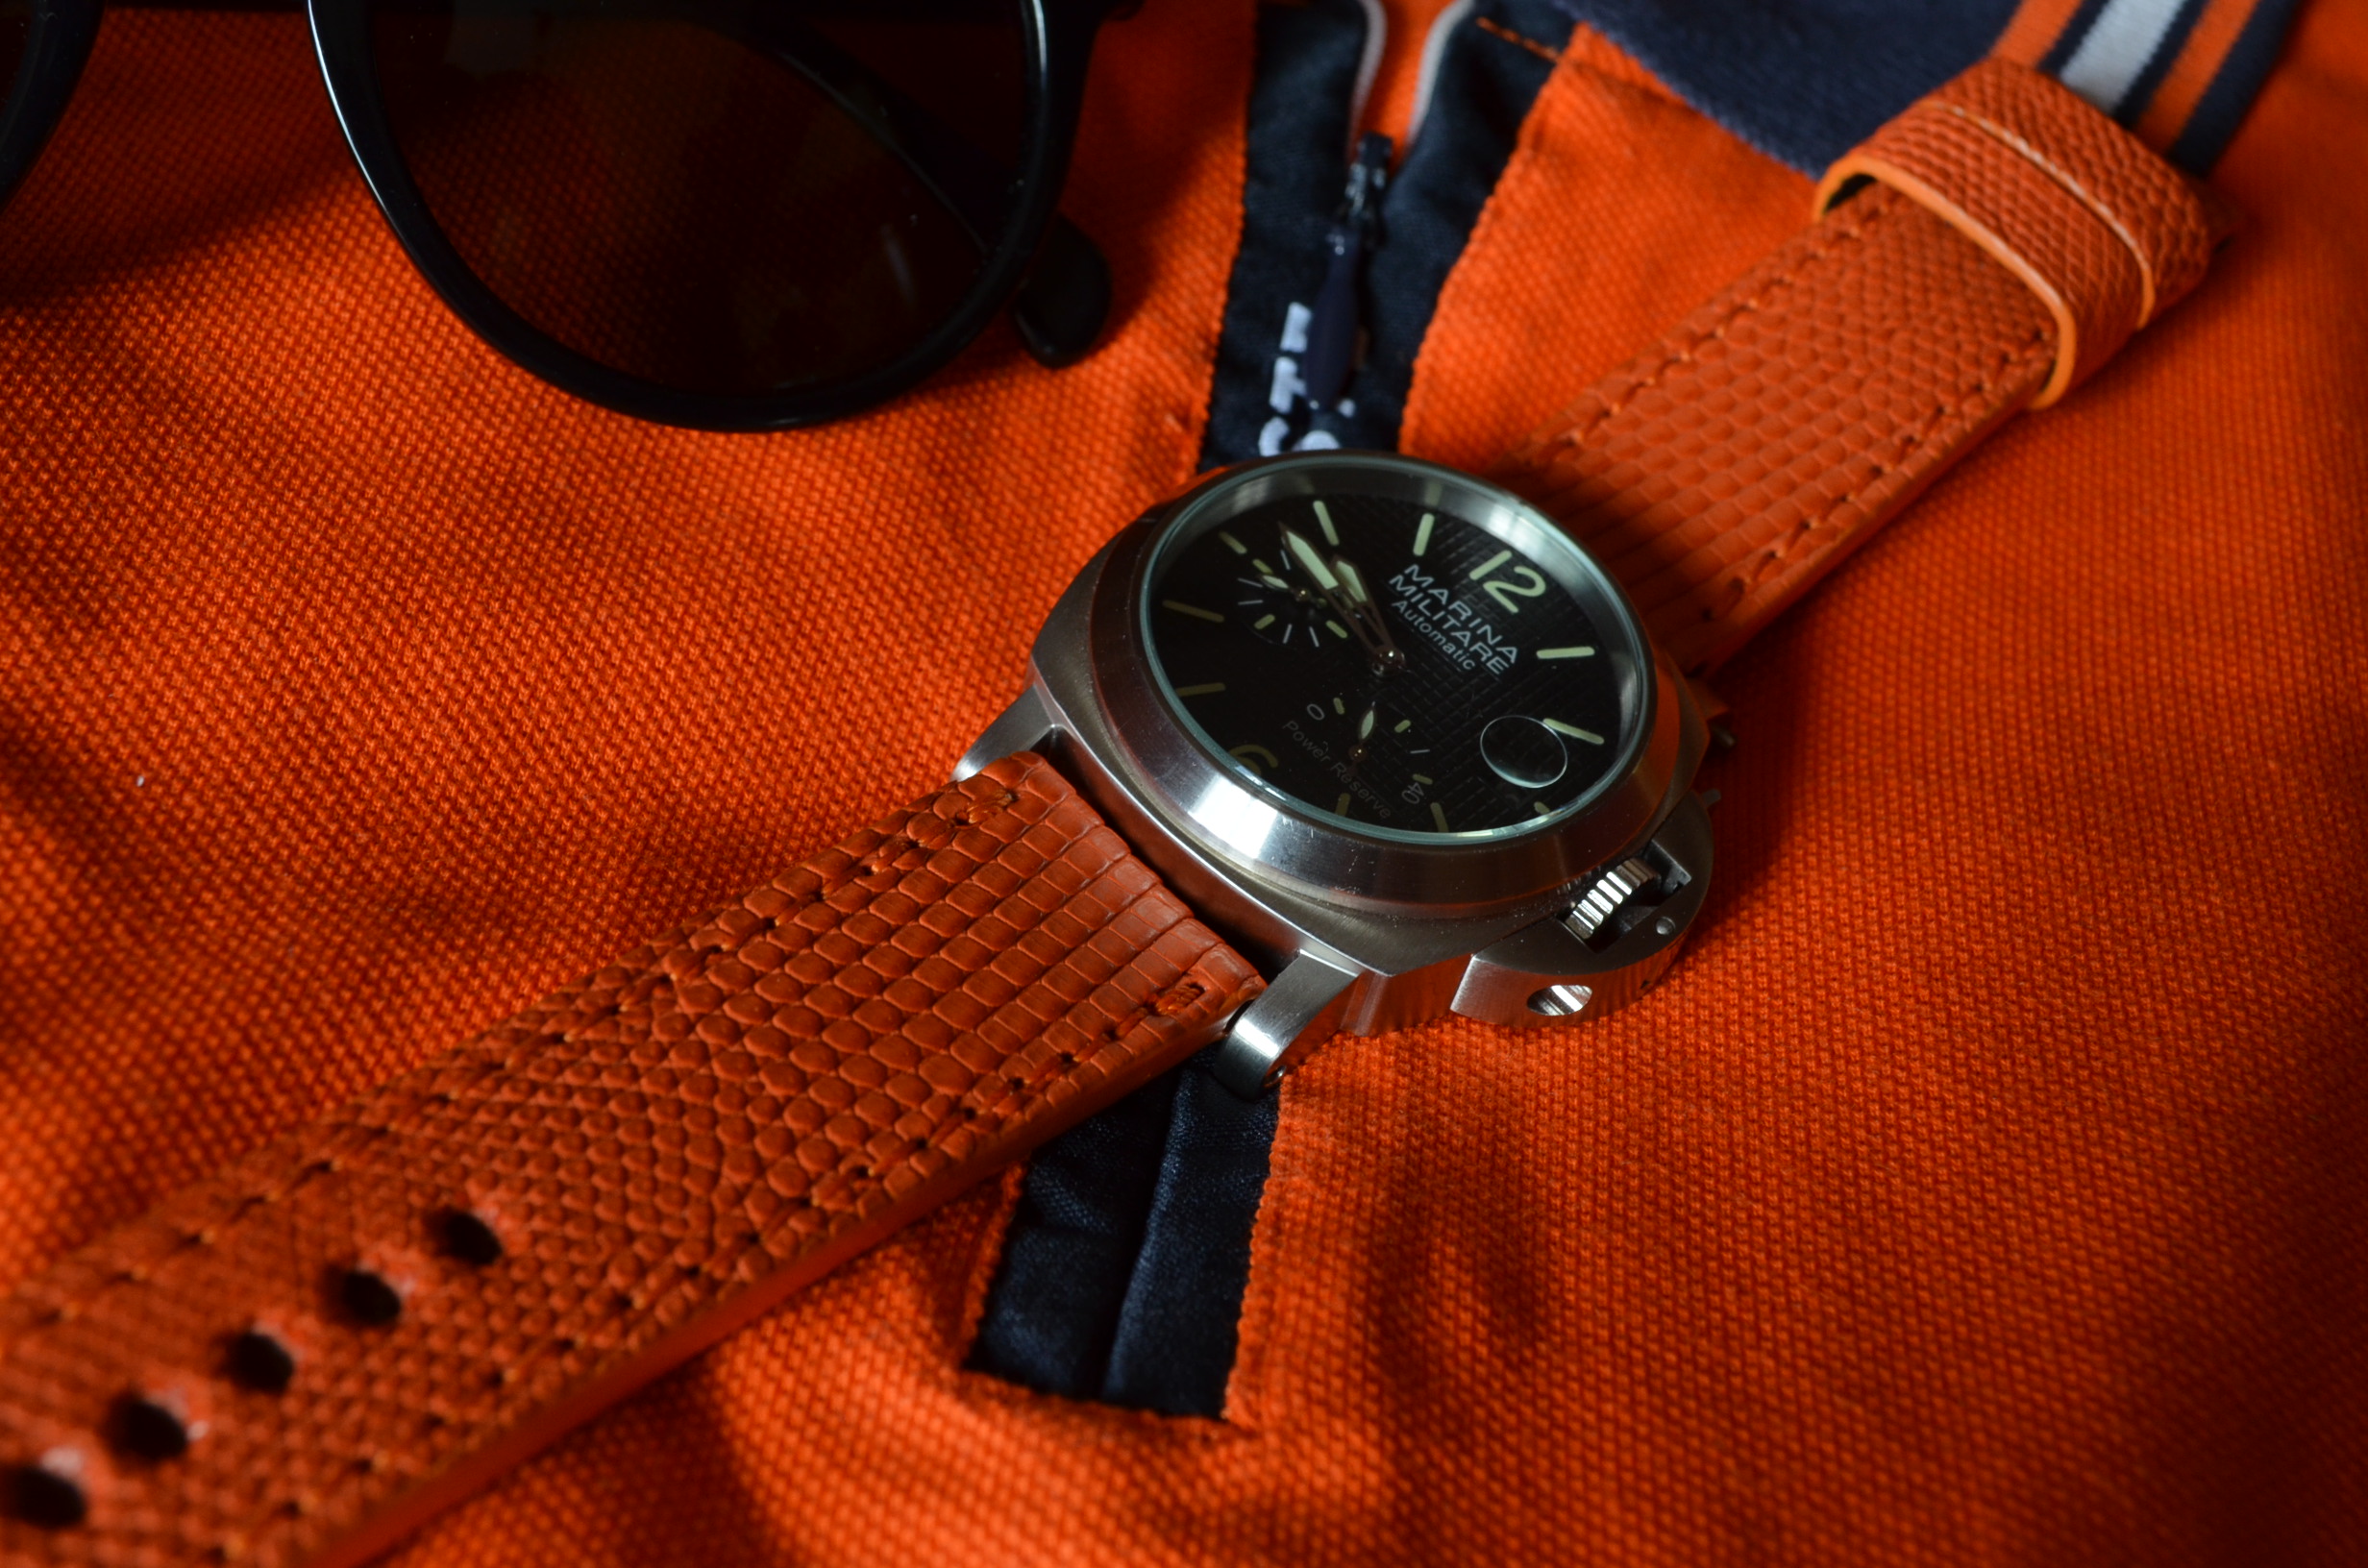 ORANGE MATTE is one of our hand crafted watch straps. Available in orange color, 3.5 - 4 mm thick.